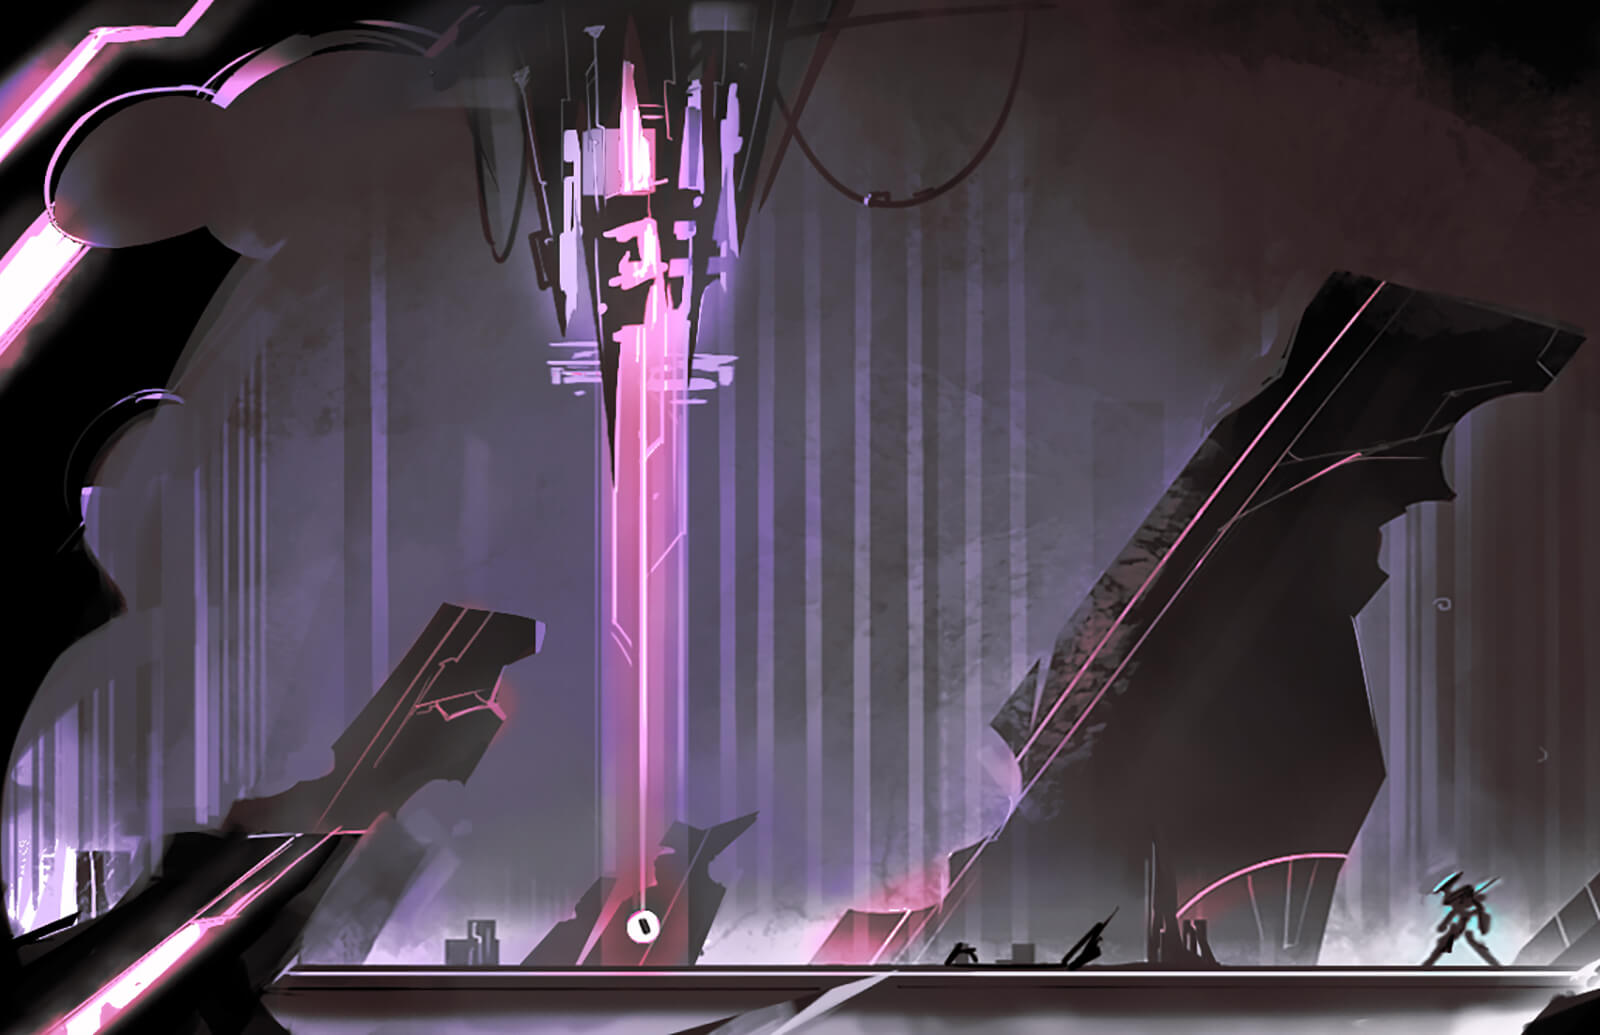 2D concept art of the film Circuitron with a glowing pink column in the center of a dark room